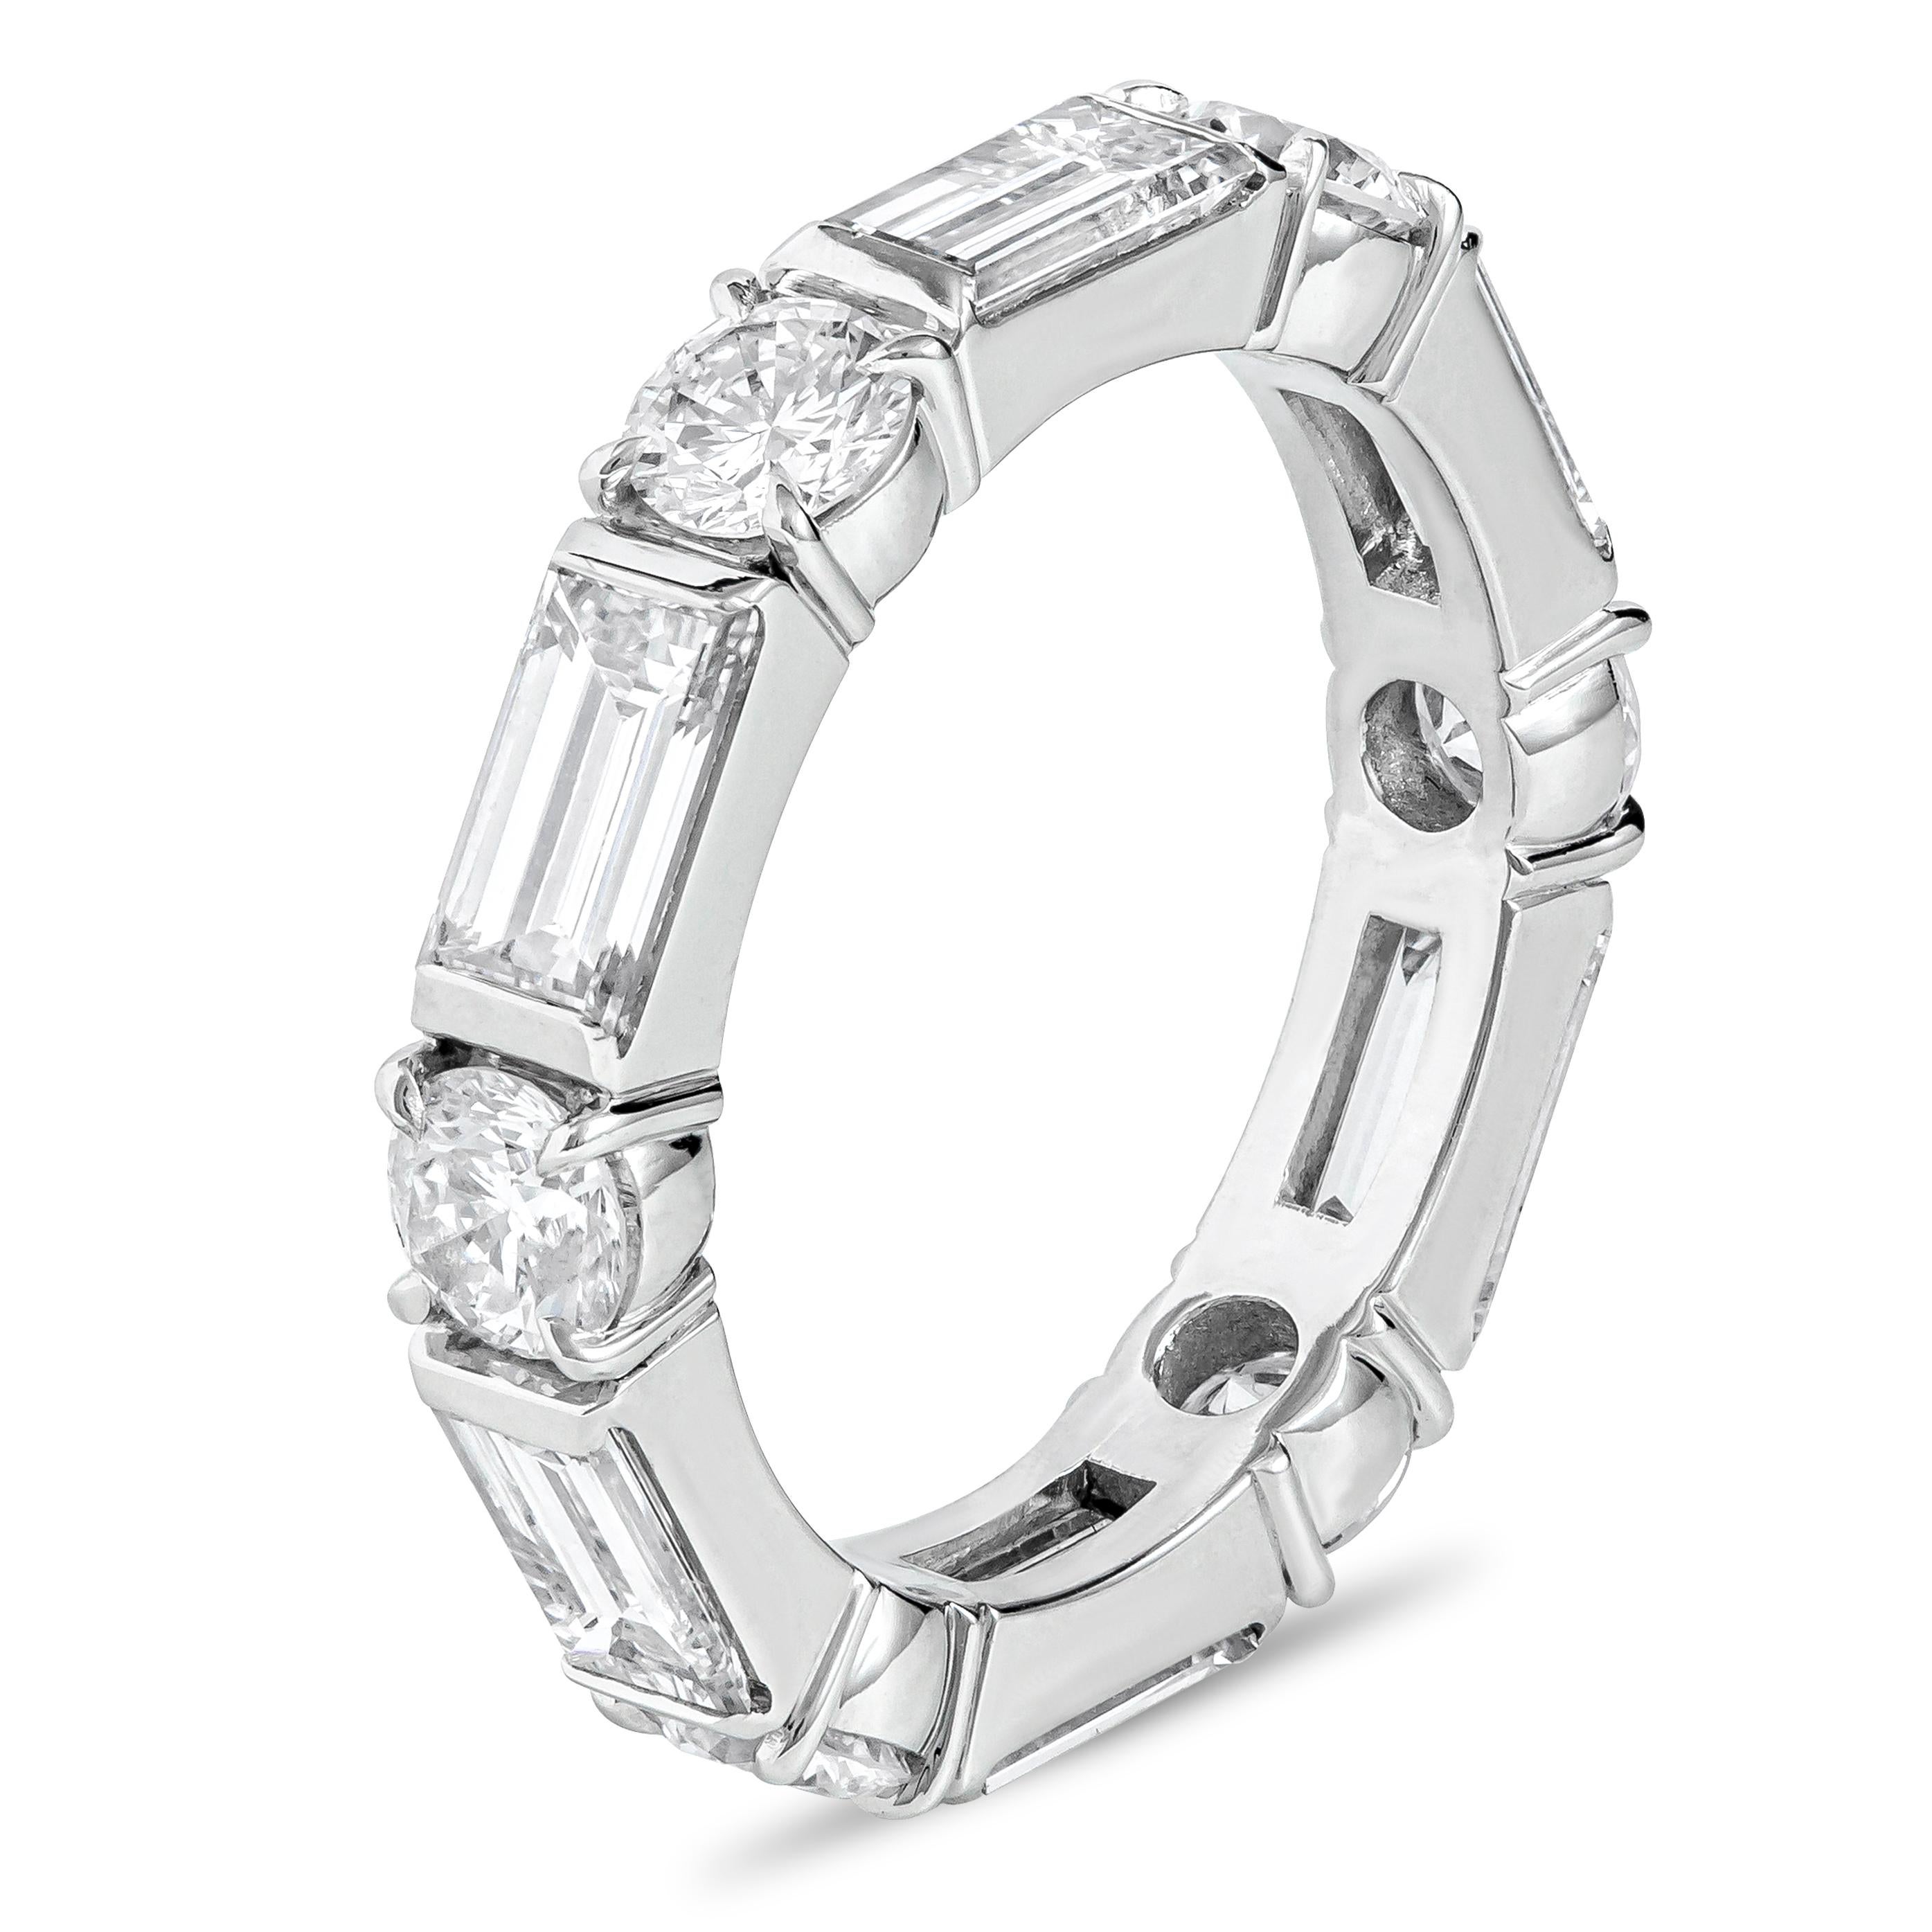 A classic eternity wedding band ring showcases alternating round and baguette diamonds. Round diamonds weigh 1.33 carats and baguette diamonds weigh 2.39 carats, G-H Color and VS-VVS in Clarity. Set in a bar and prongs setting, Made with Platinum,